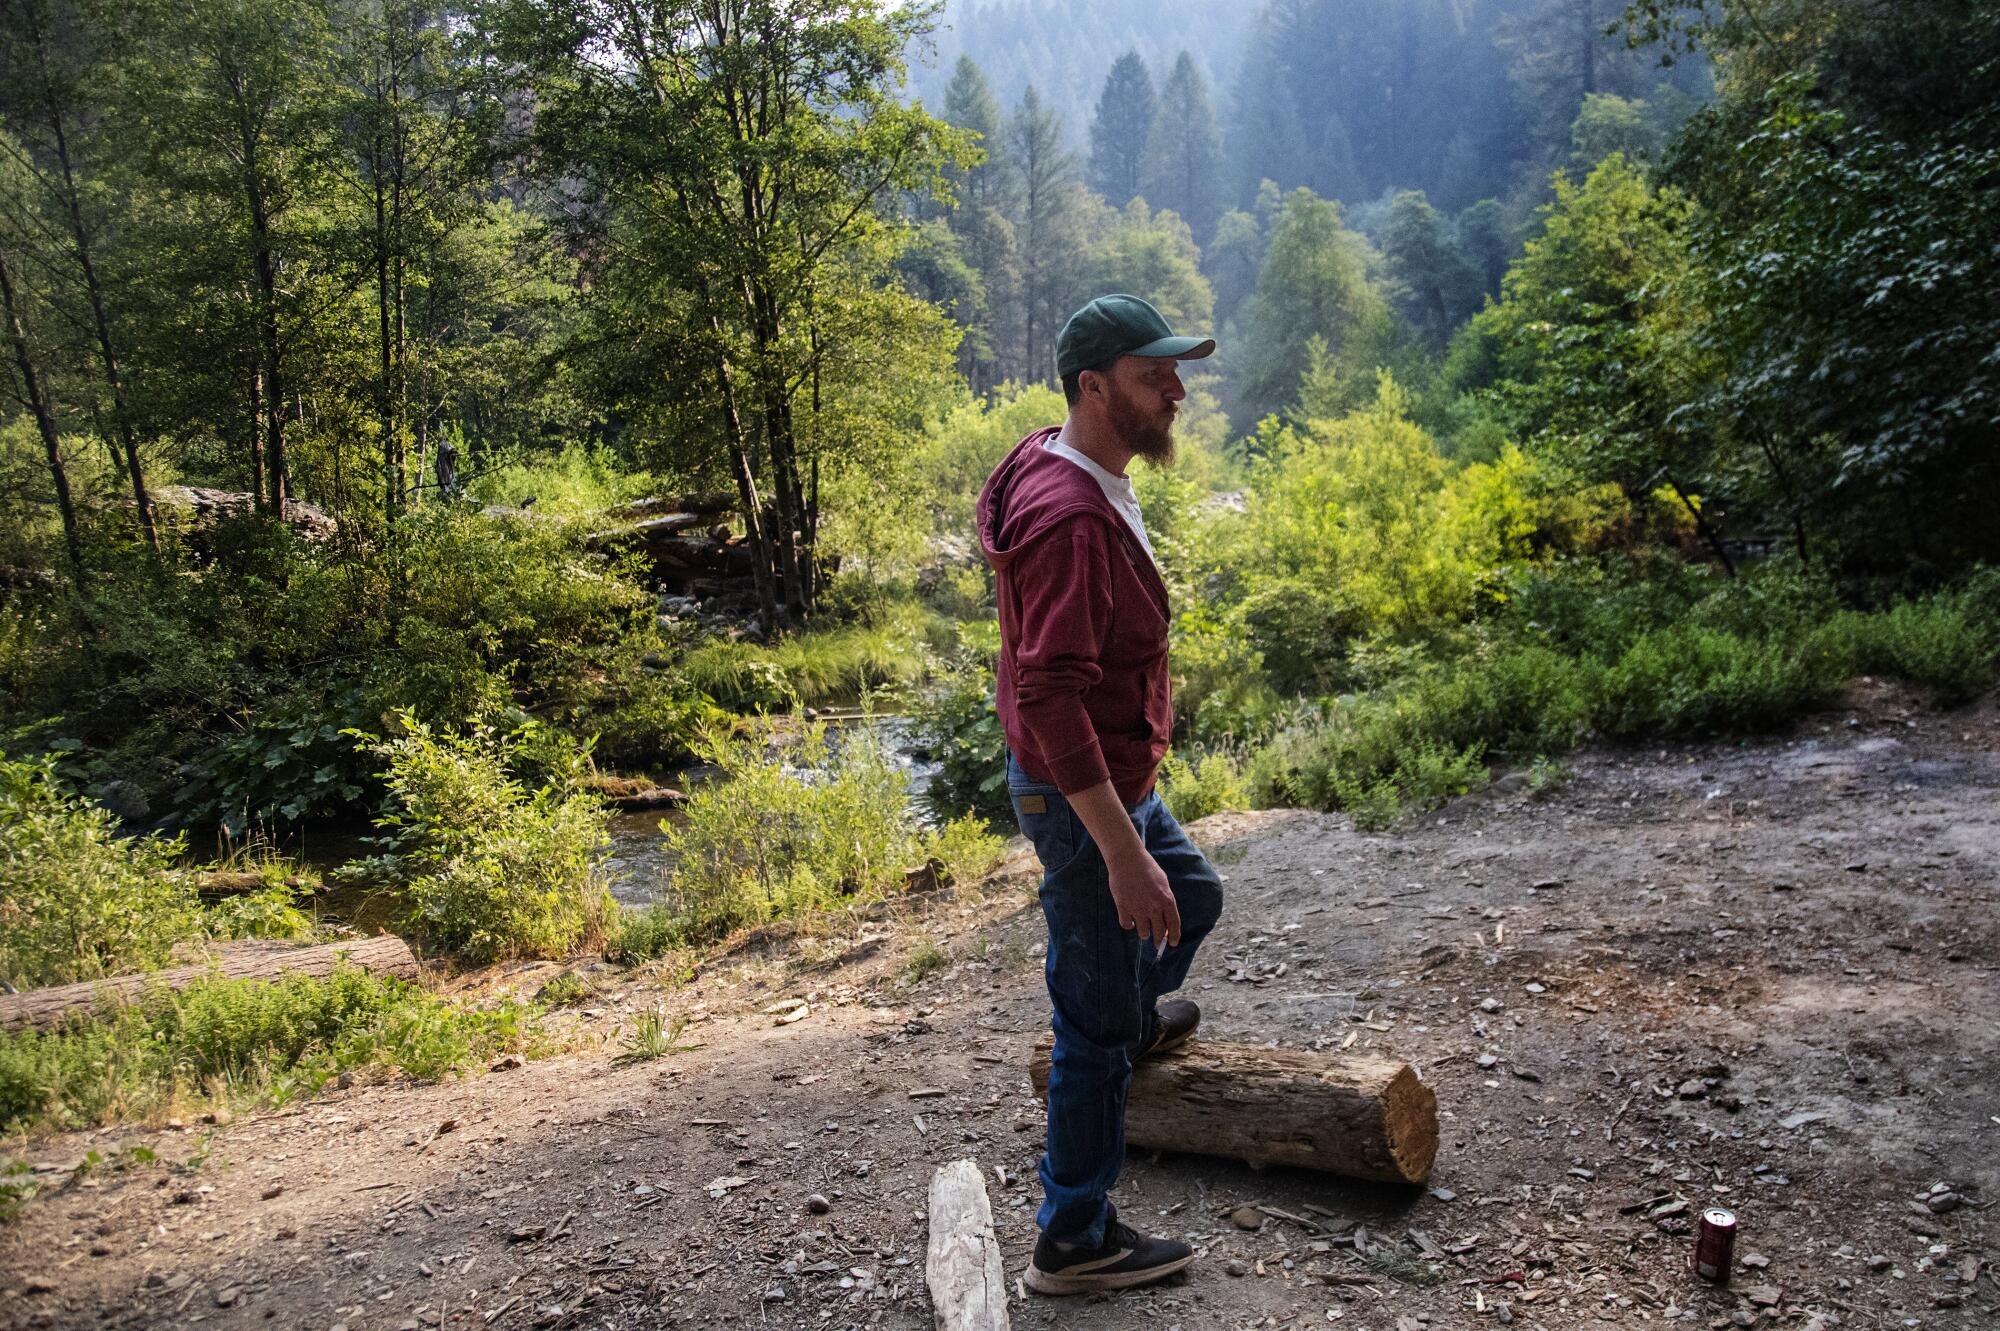  Jedediah Anderson stands with his foot on a log at a wilderness campsite.